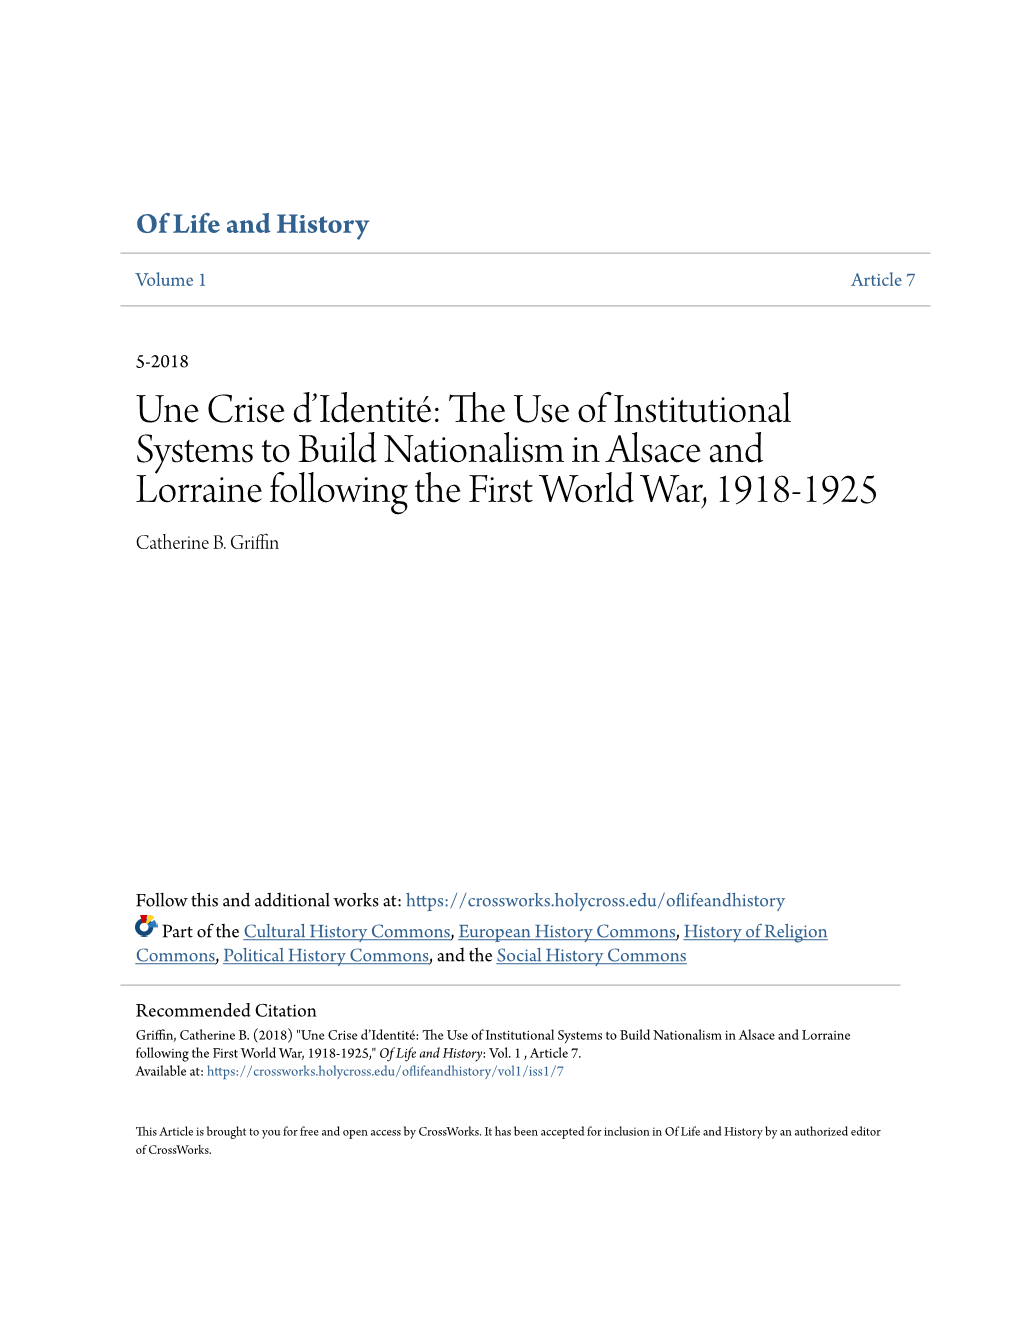 The Use of Institutional Systems to Build Nationalism in Alsace and Lorraine Following the First World War, 1918-1925 Catherine B